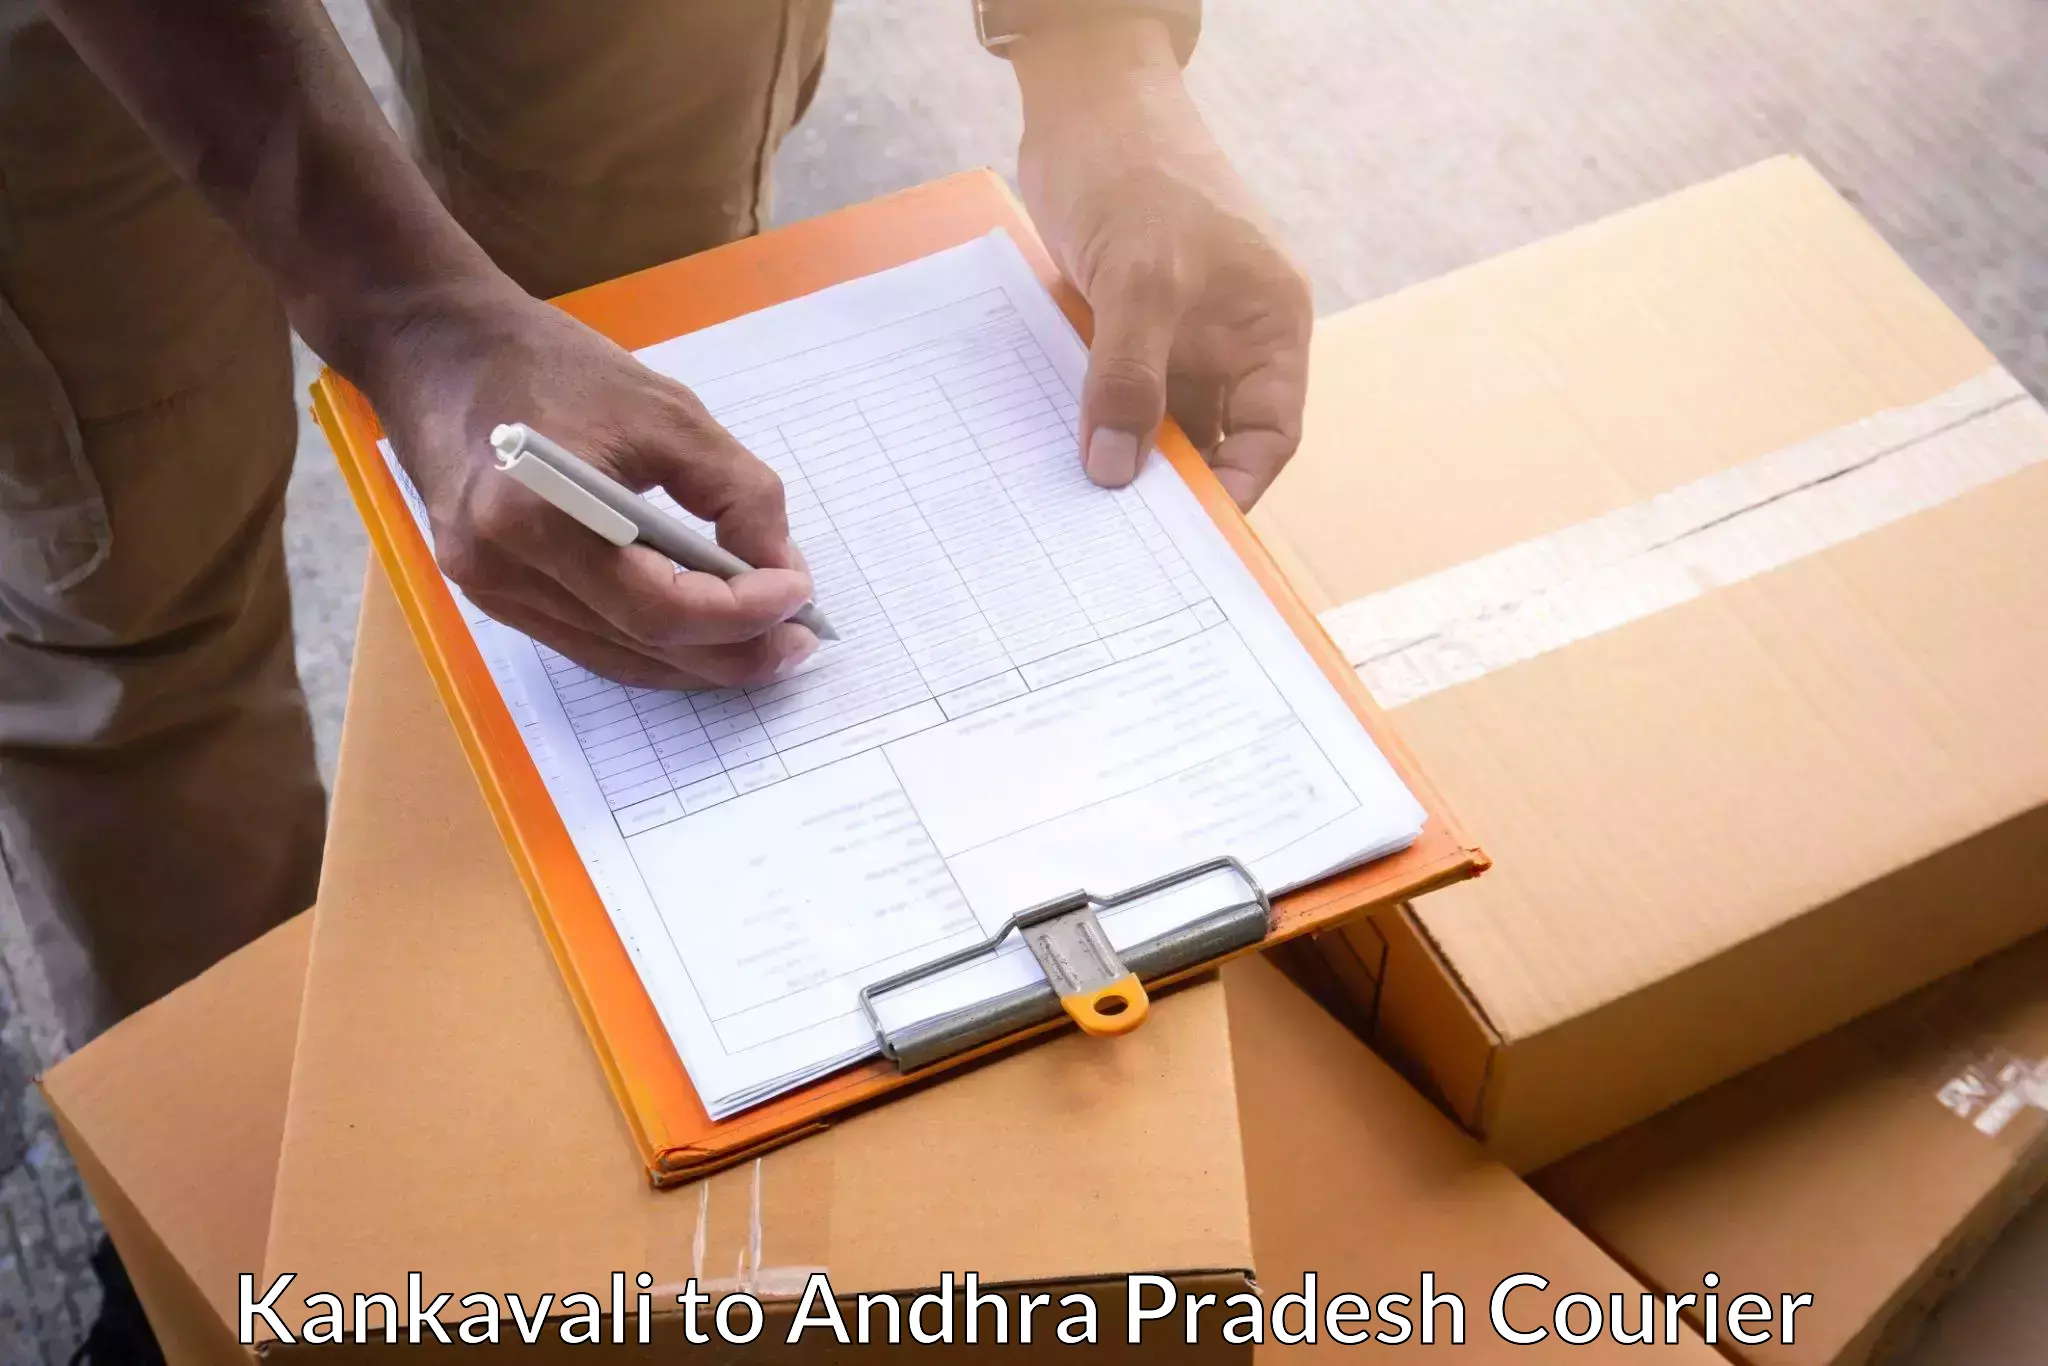 Expedited parcel delivery in Kankavali to Kothapalli